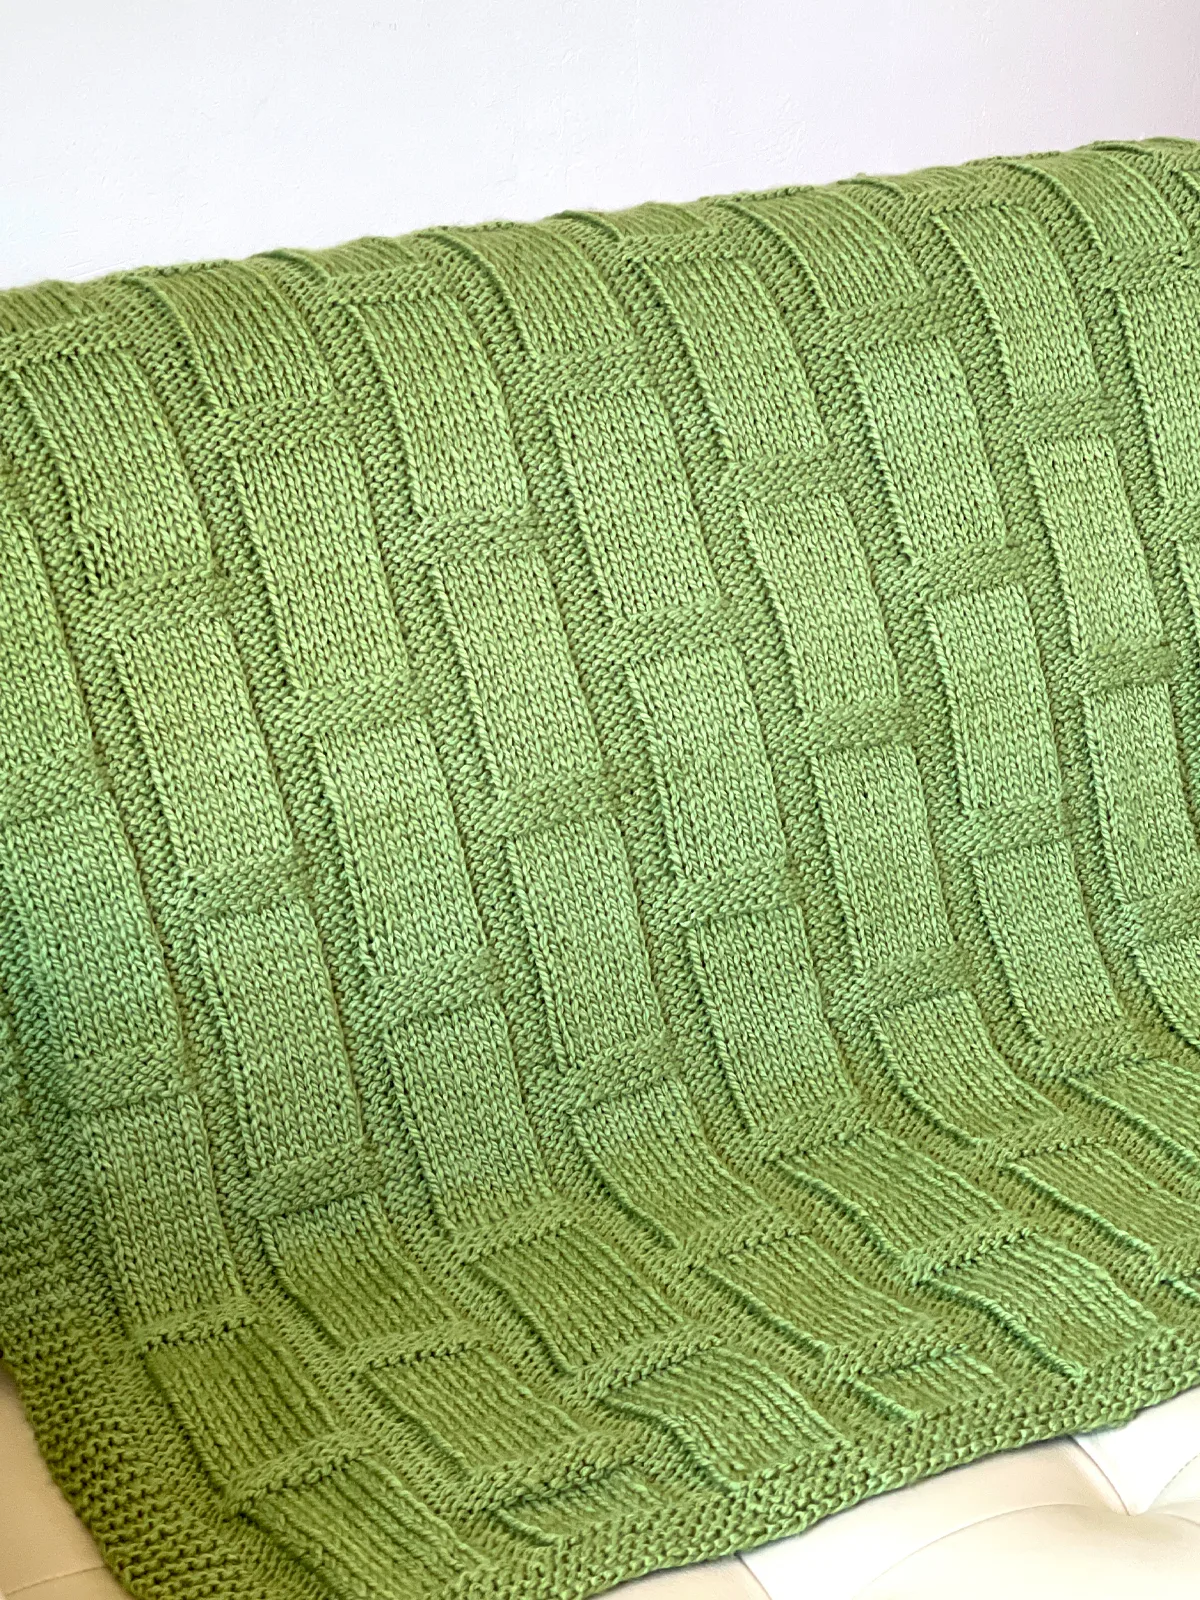 Knitted blanket in bamboo stitch texture in green colored yarn displayed on a loveseat couch.